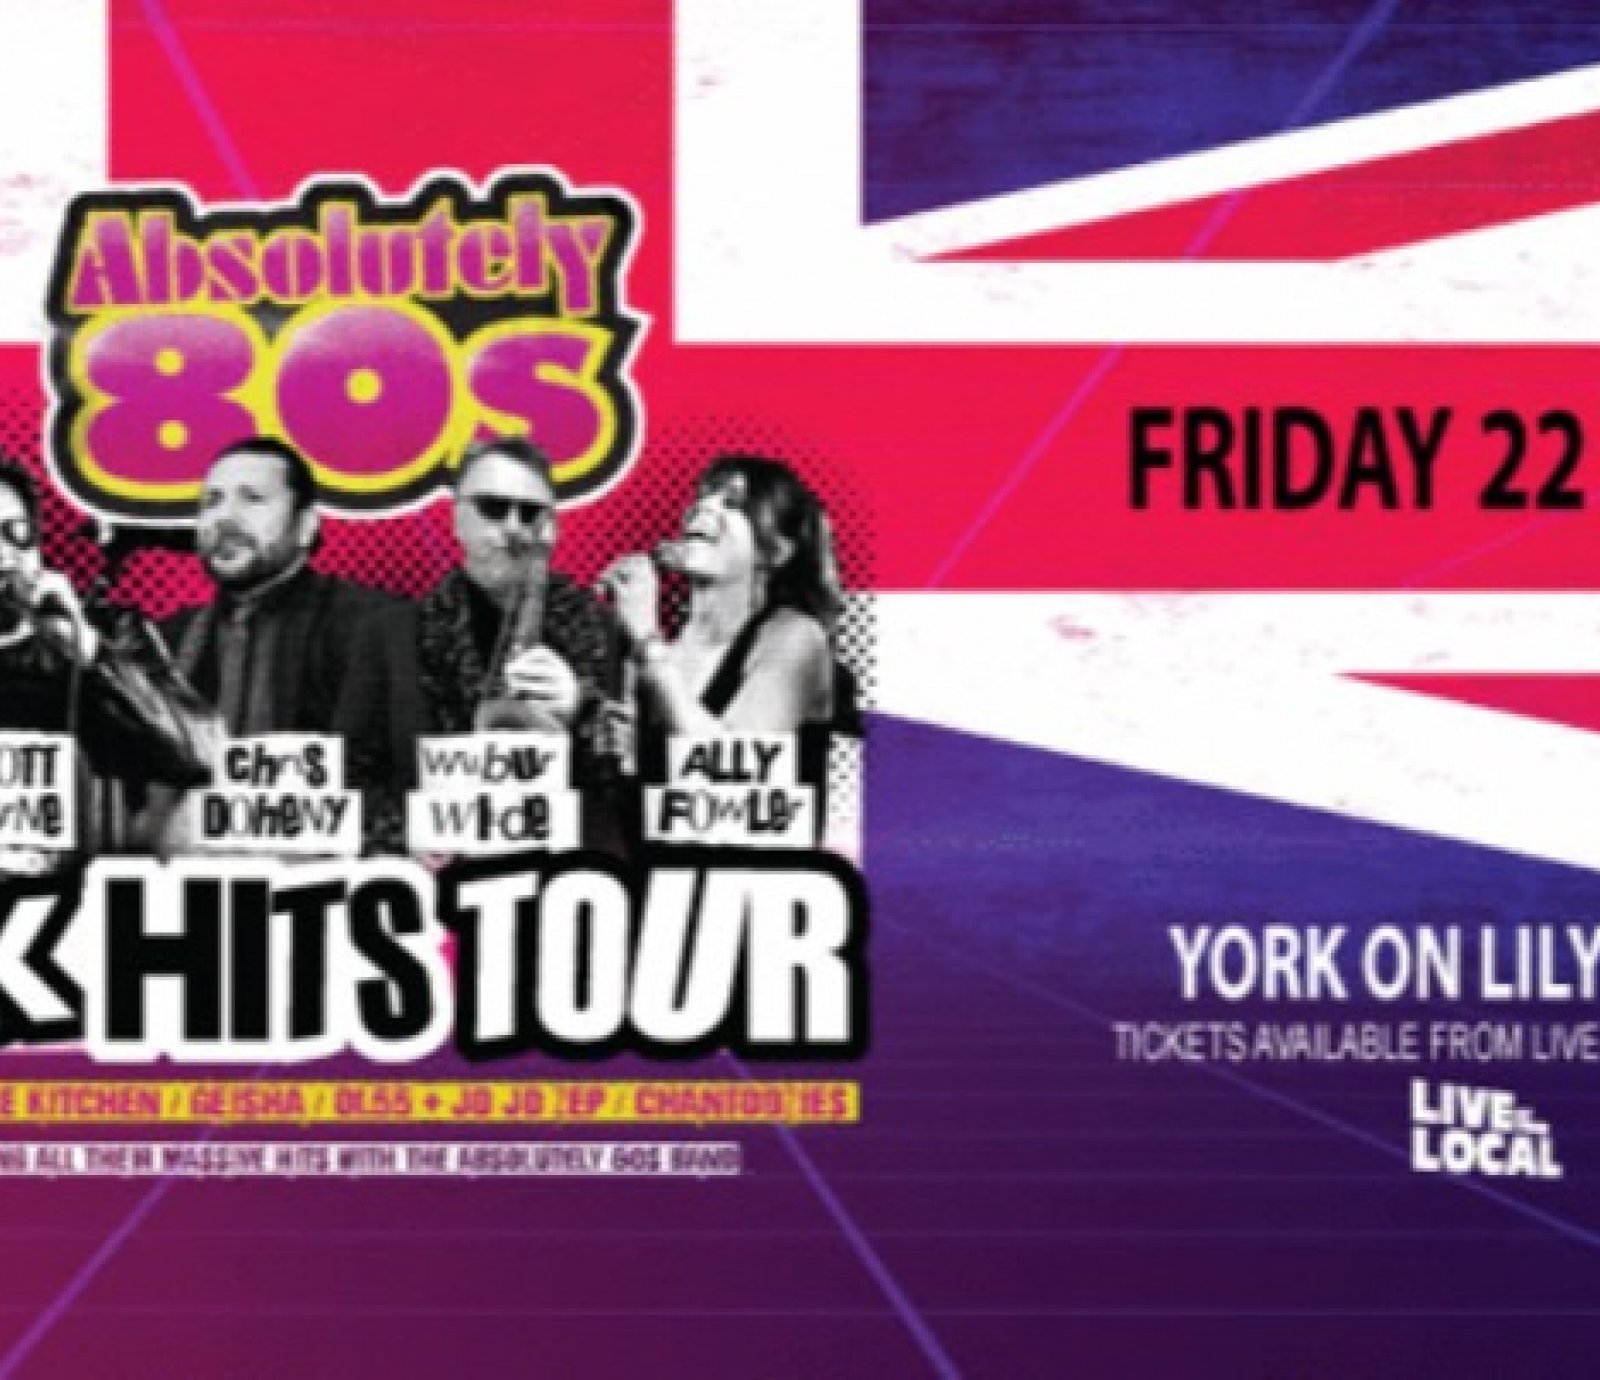 The Absolutely 80's - UK Hits Tour